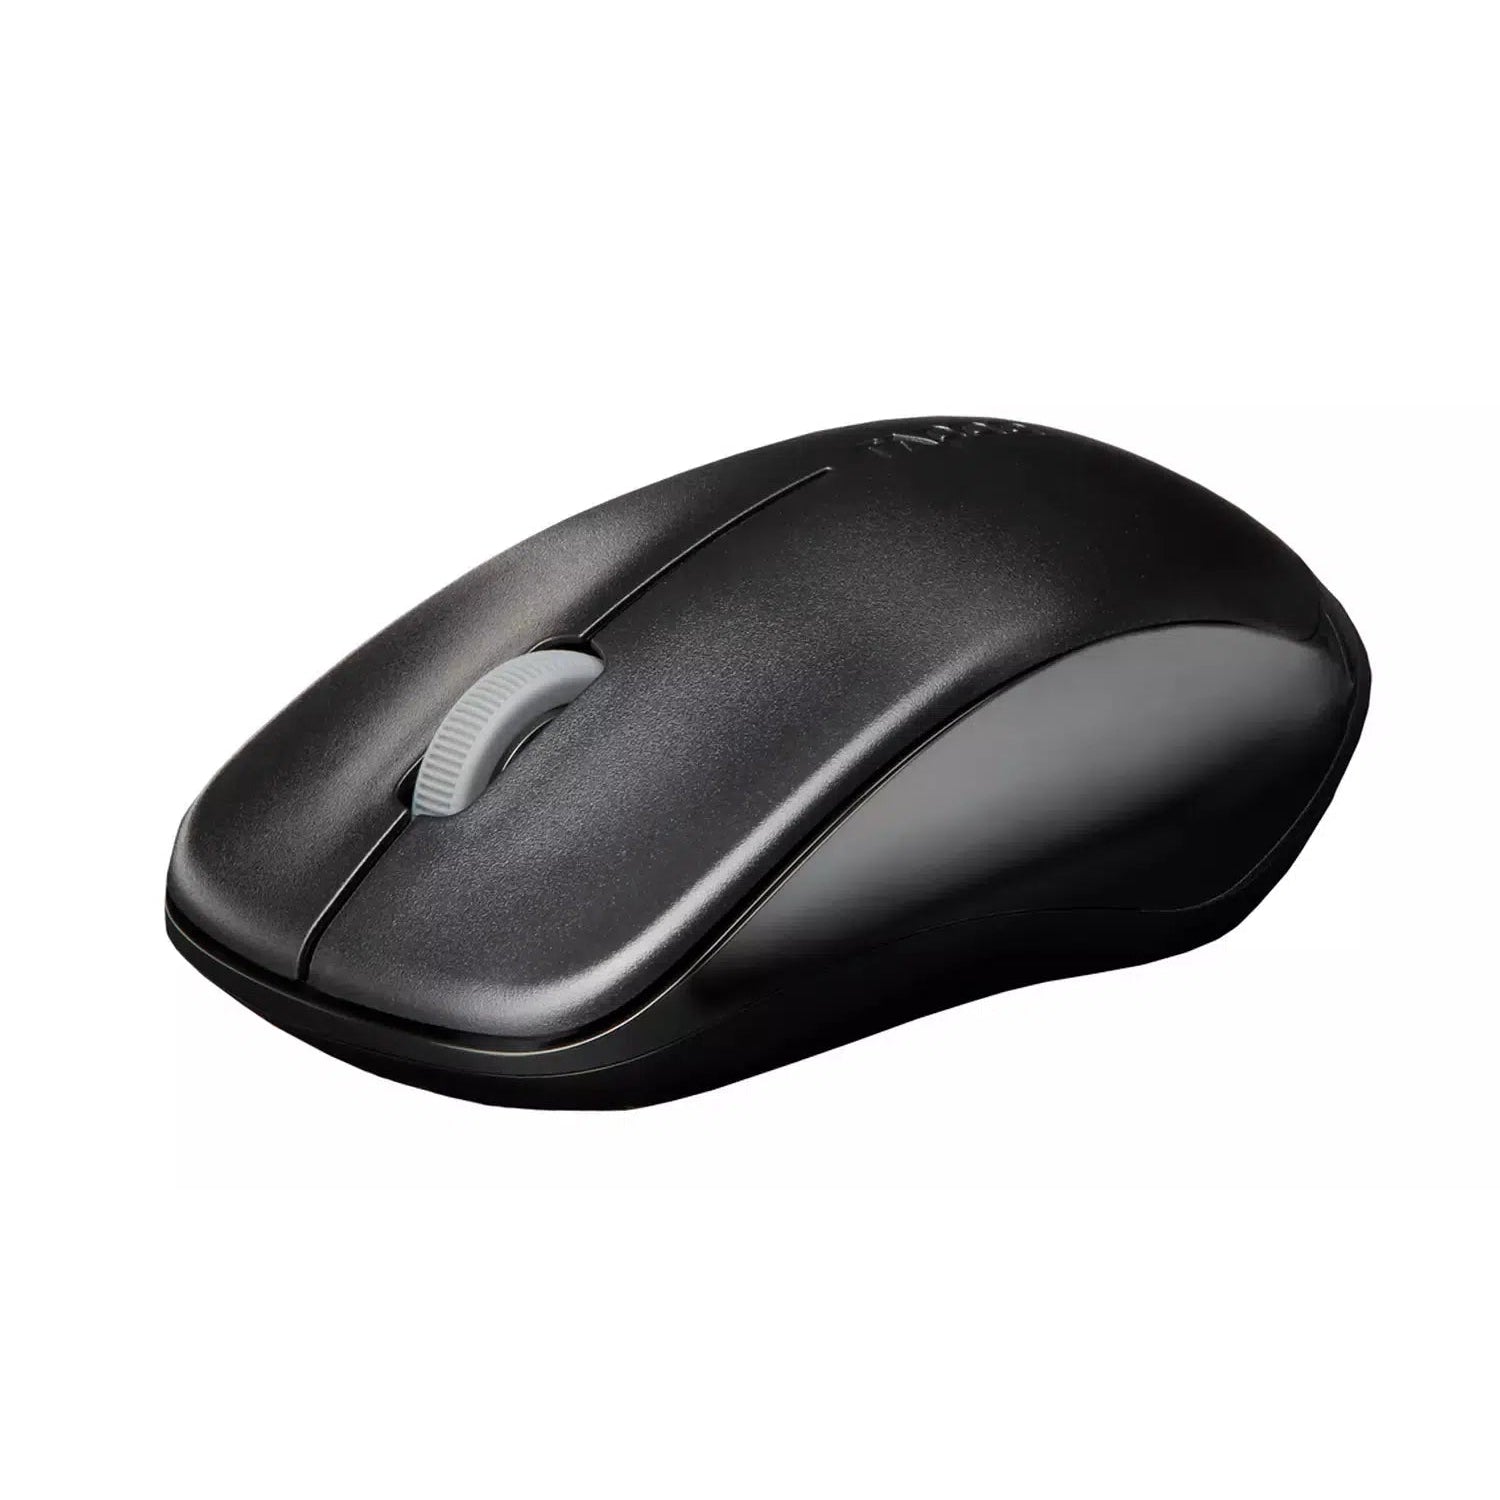 Rapoo 1620 Wireless Optical Mouse - Black - Refurbished Excellent